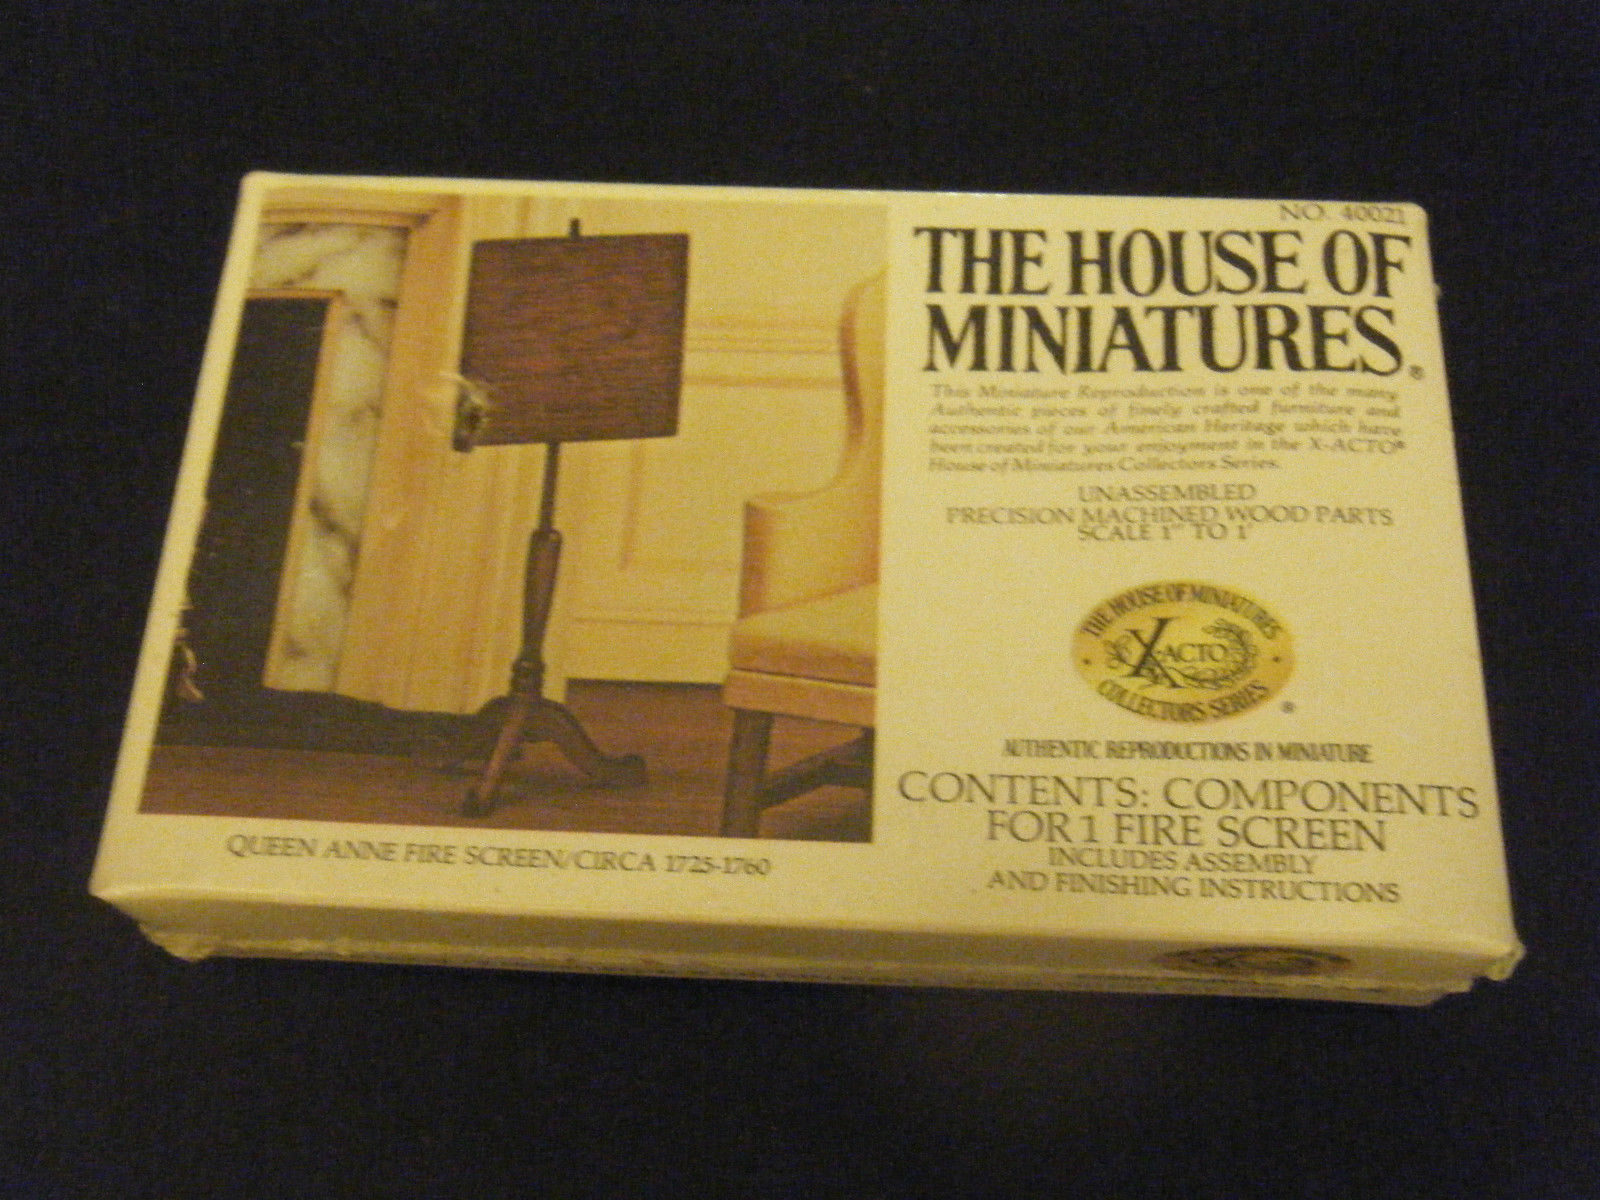 X-Acto House of Miniatures #40021 Queen Anne Fire Screen - Unassembled - NEW - $13.22